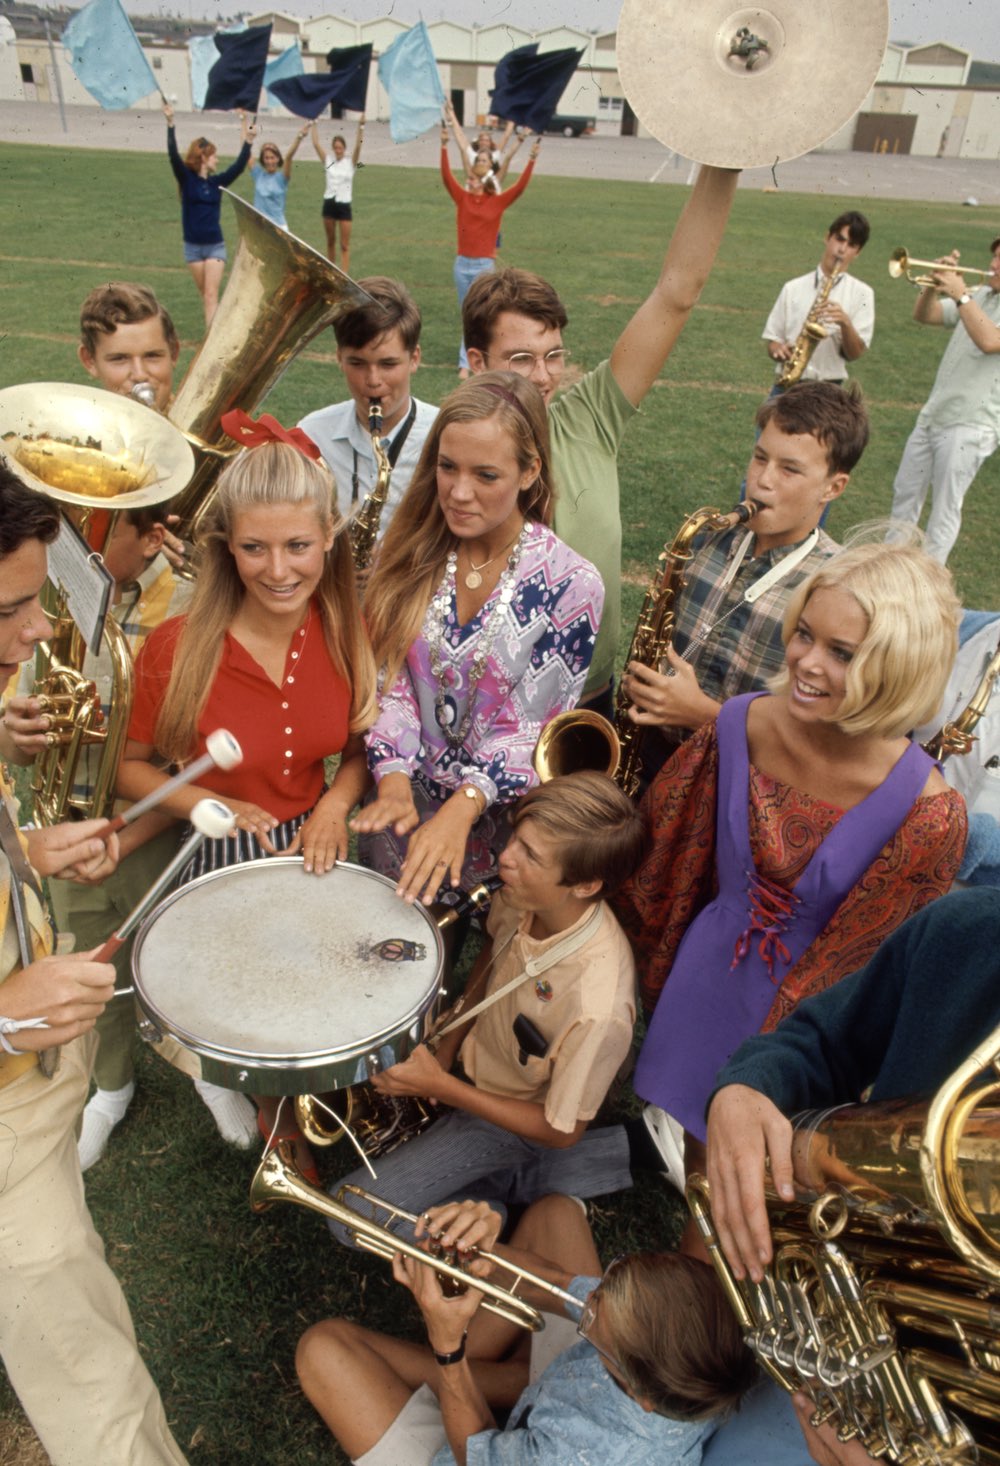 Subject: Southern High school student band wearing hippy fashion. California October 1969 Photographer- arthur Schatz Time Inc Owned merlin- 1201960